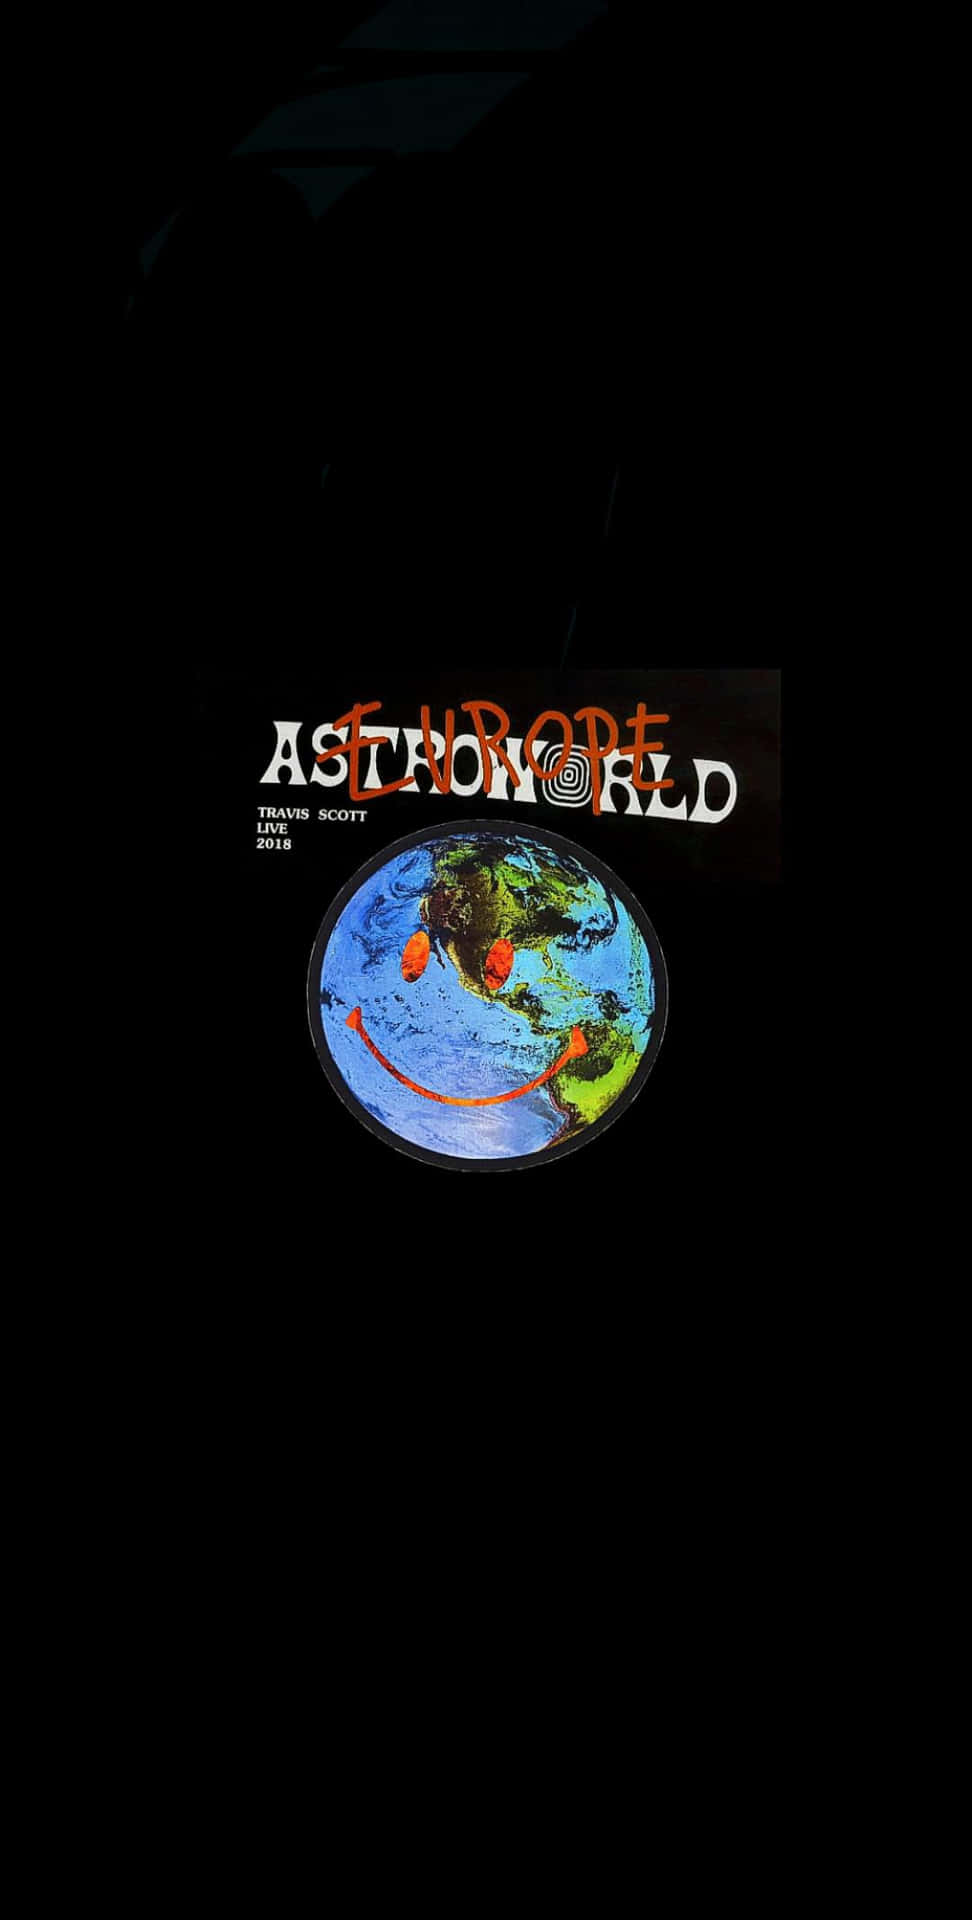 Welcome to Astroworld - A world of fun and thrills